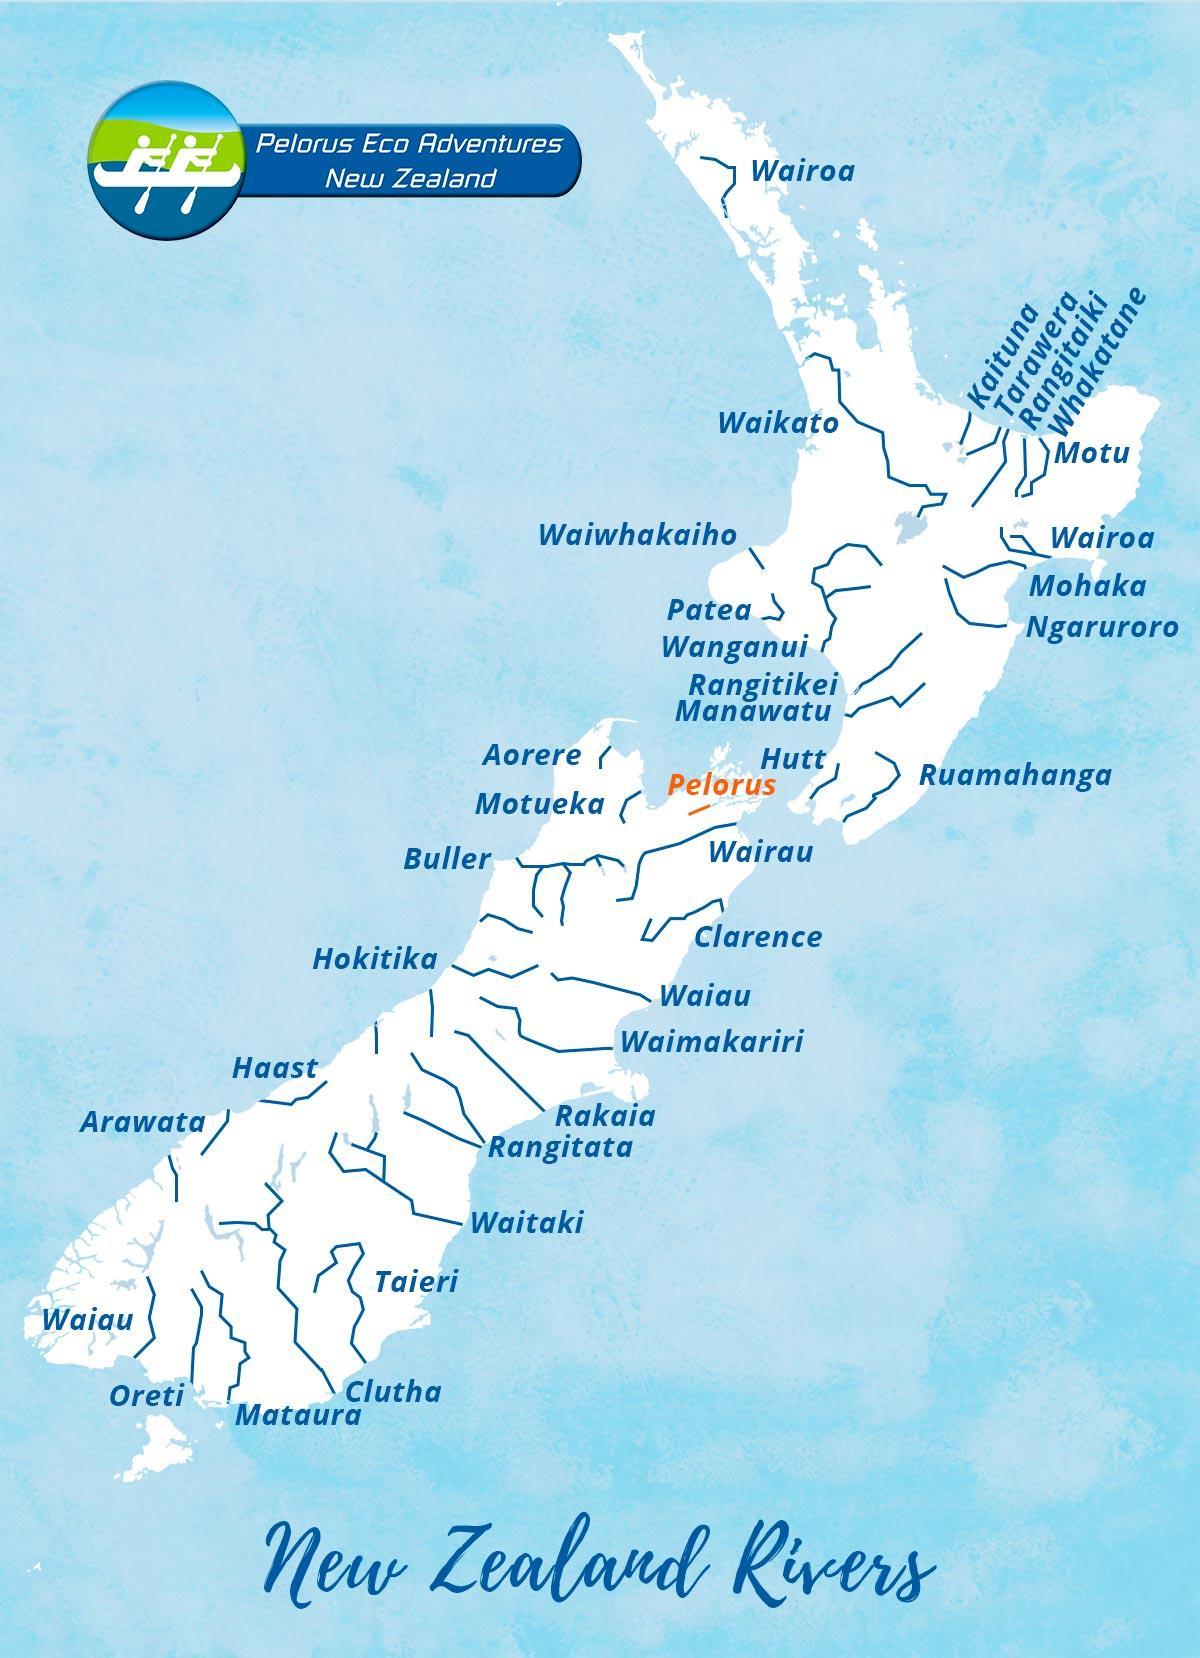 Rivers in New Zealand map